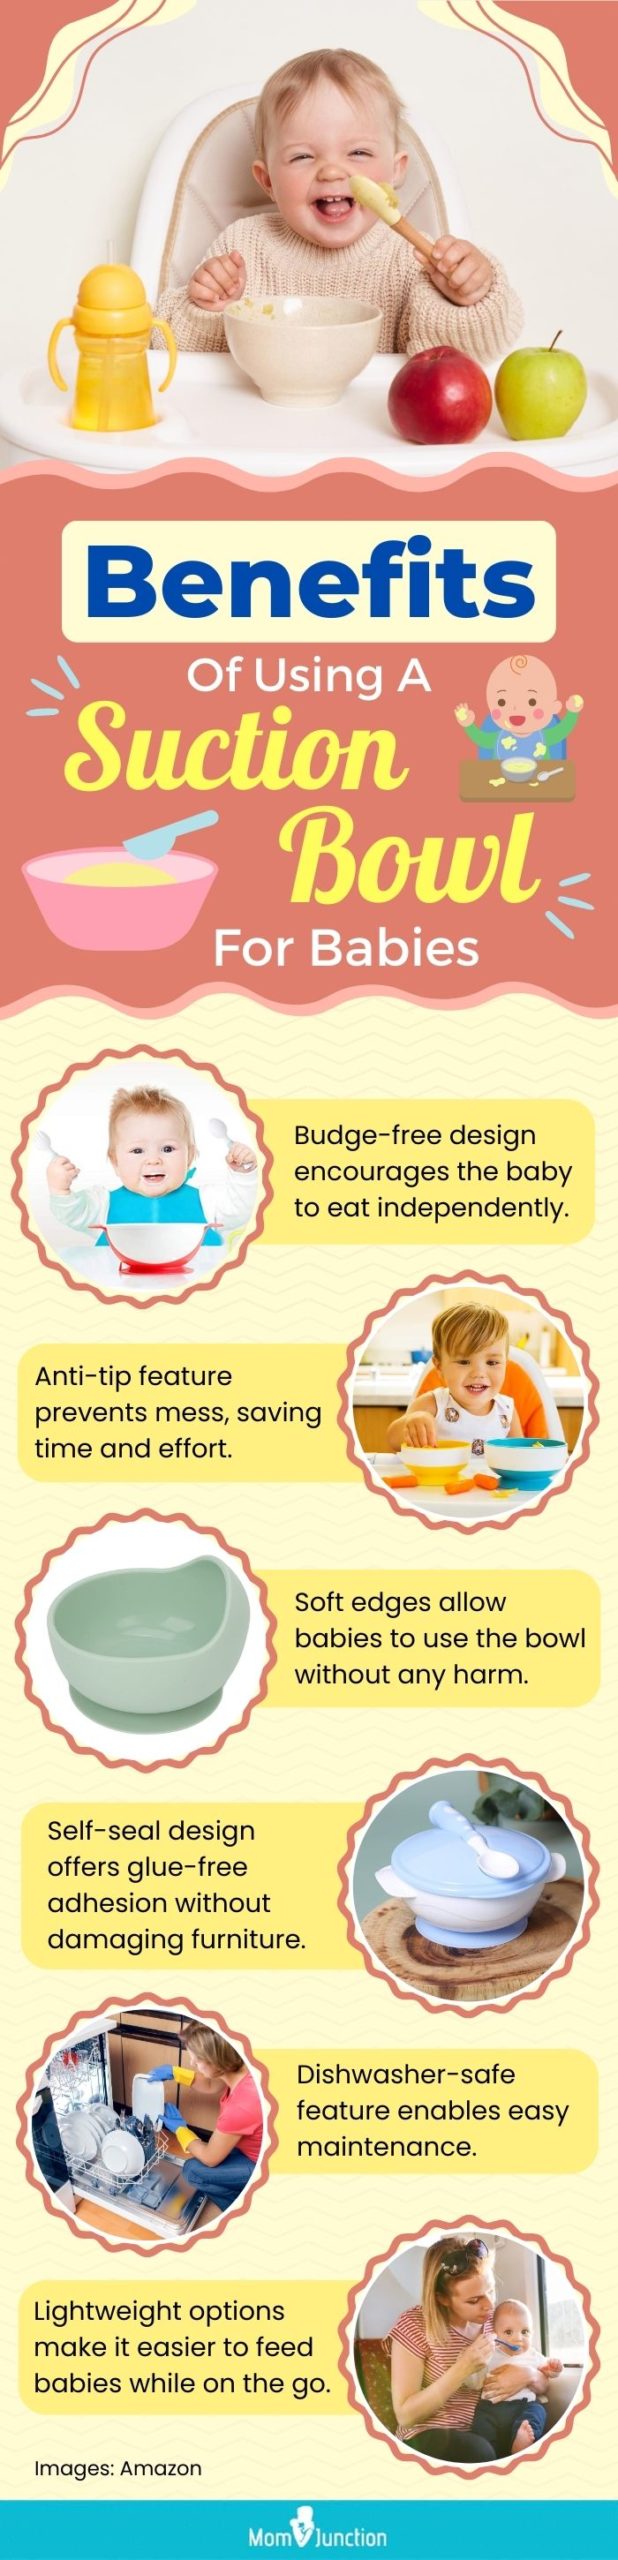 Benefits Of Using A Suction Bowl For Babies (infographic)